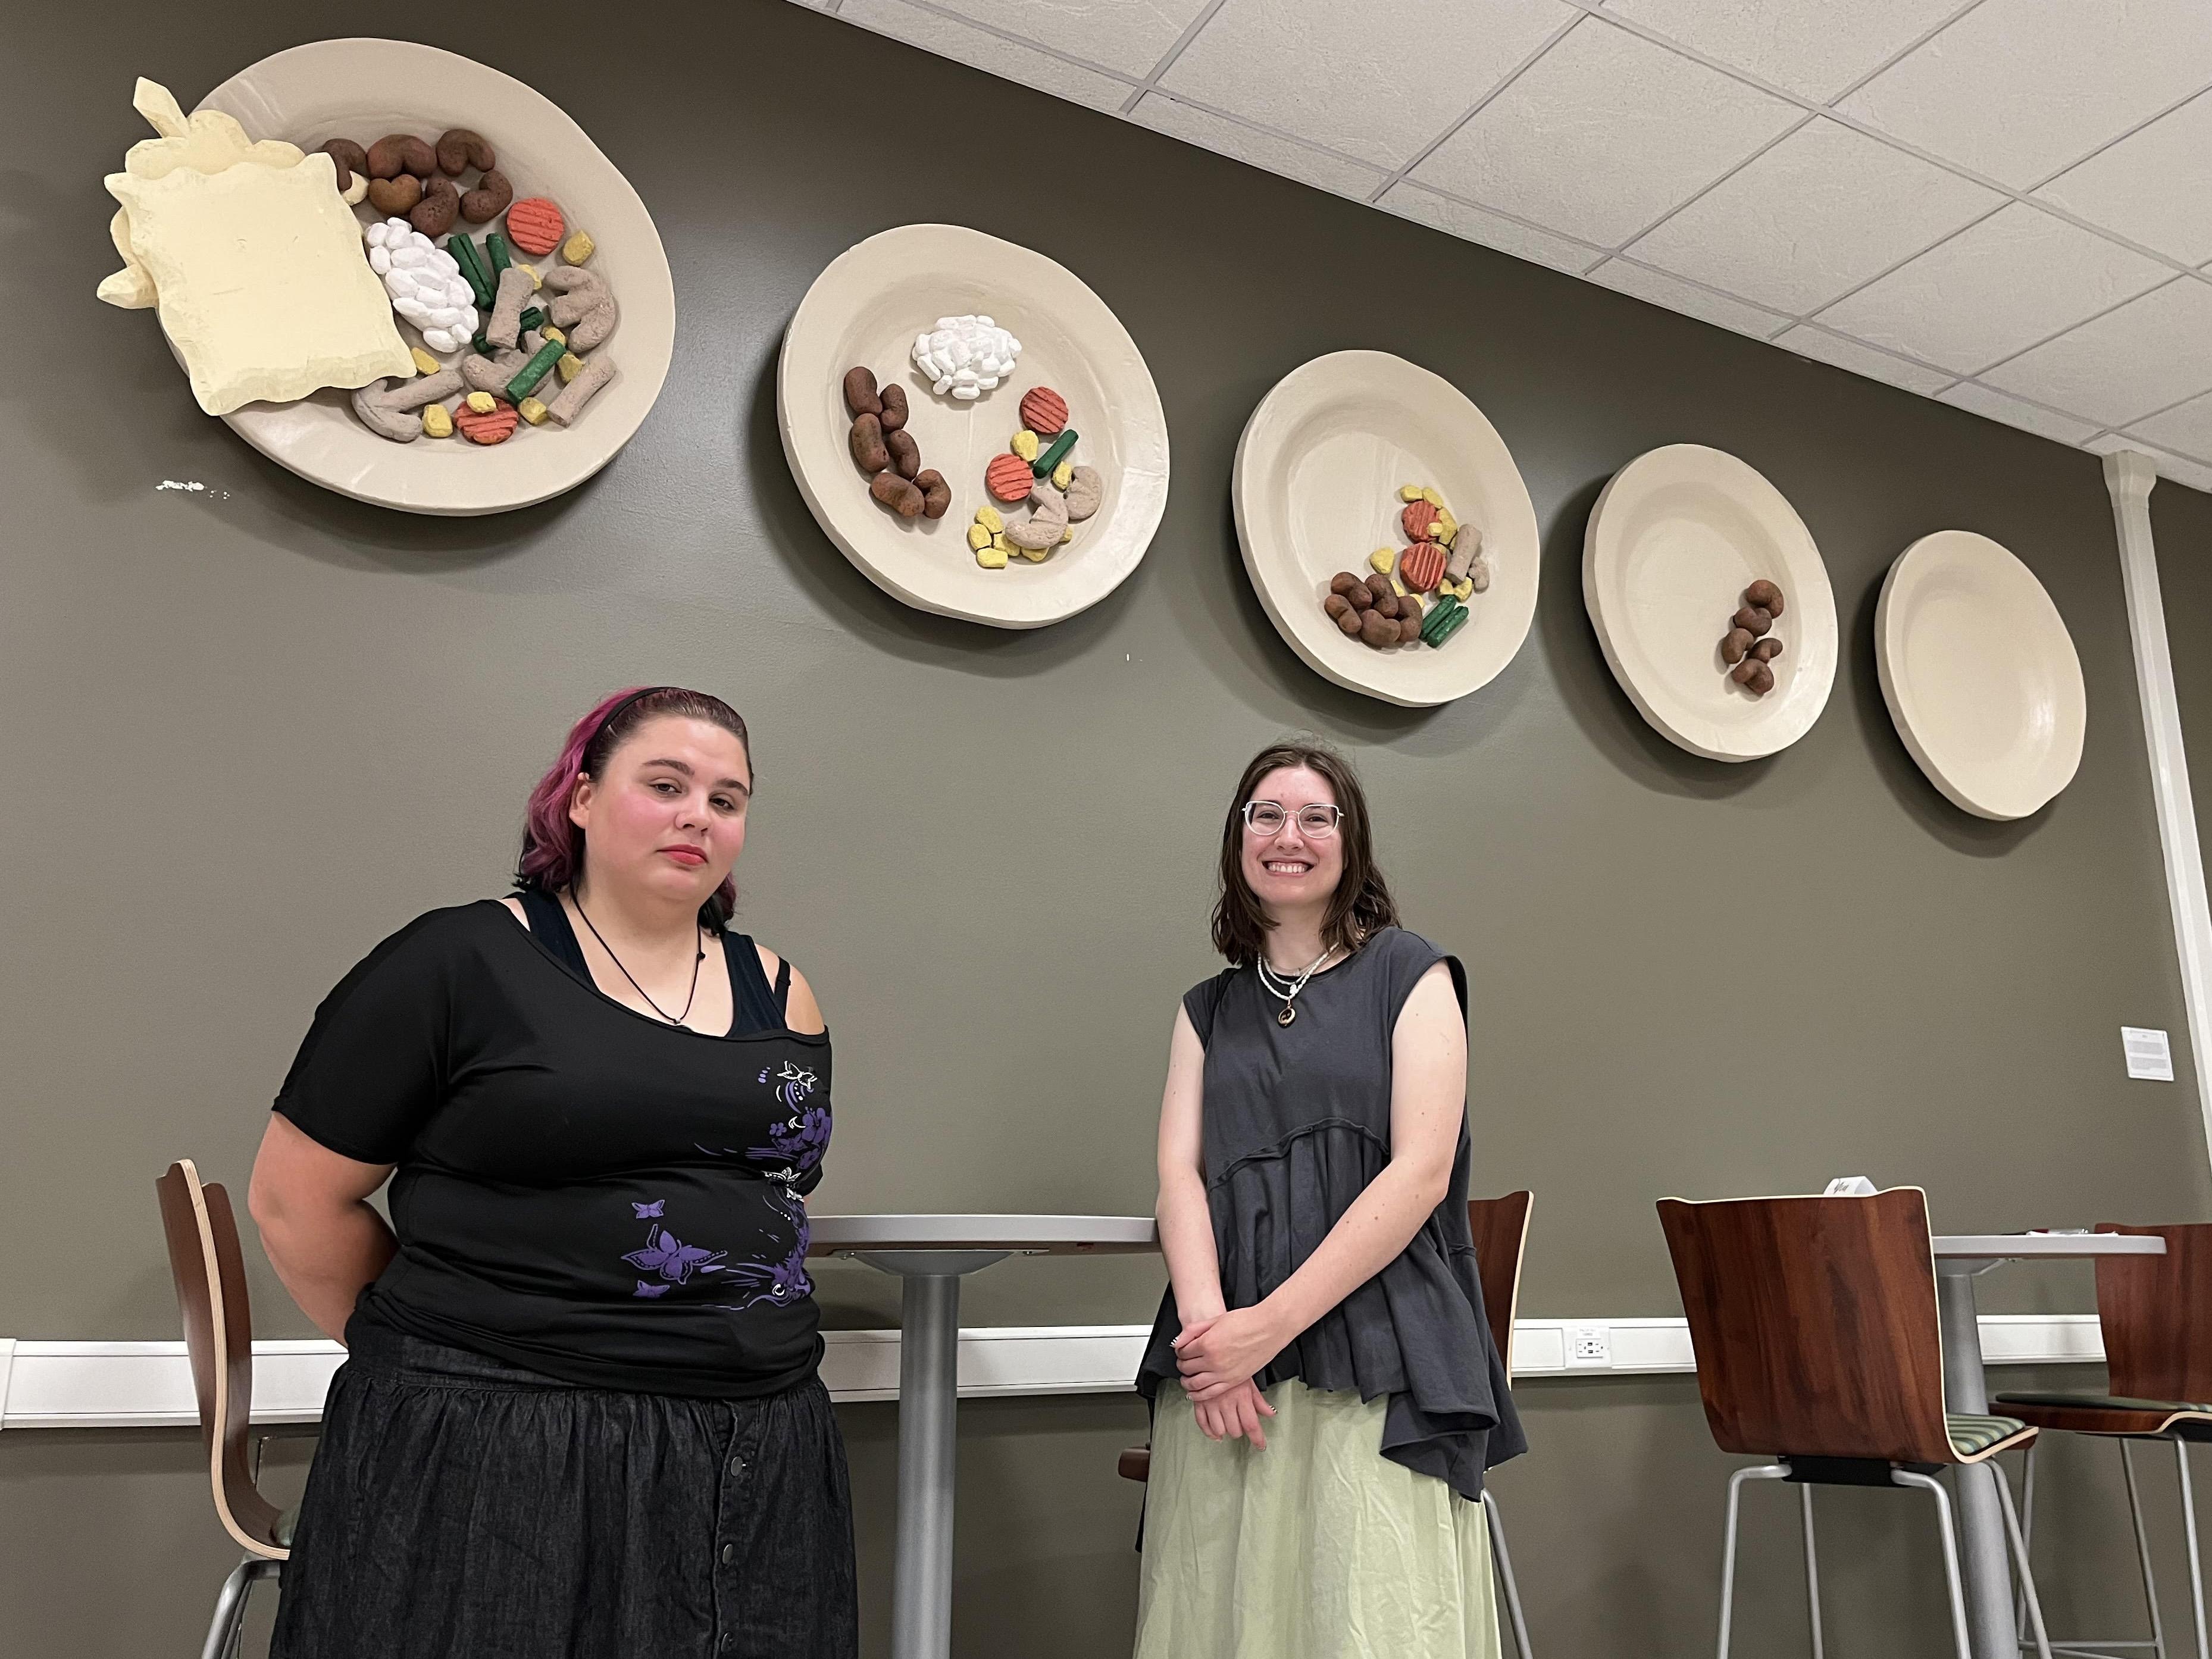 Seniors Suzan Bean and Caitlin Marx led the sculpture project titled Potluck that calls attention to the SHOP pantry's services for students in need